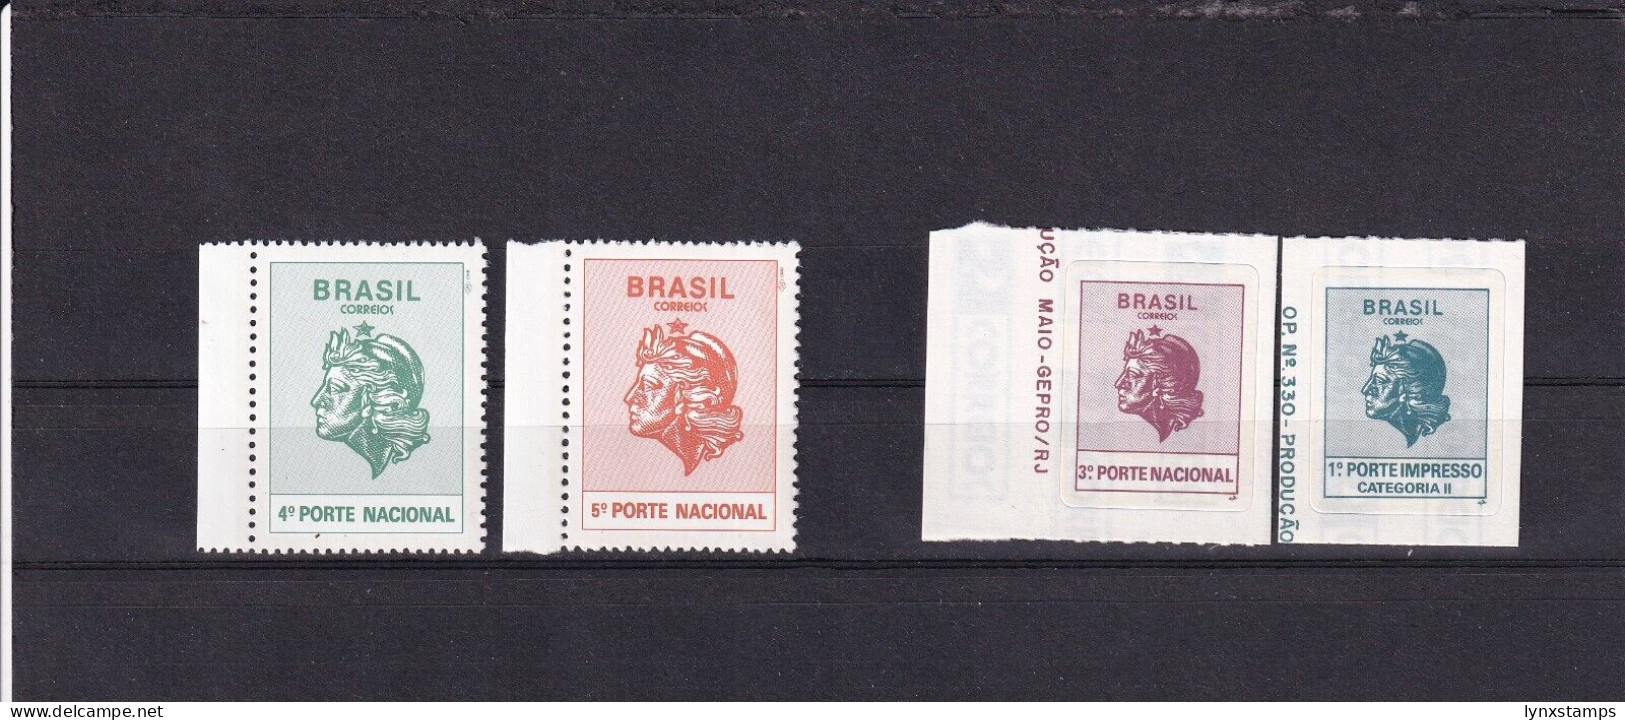 SA06 Brazil 1994 Stamps With No Value Expressed, 2 Self-adhesive - Ungebraucht